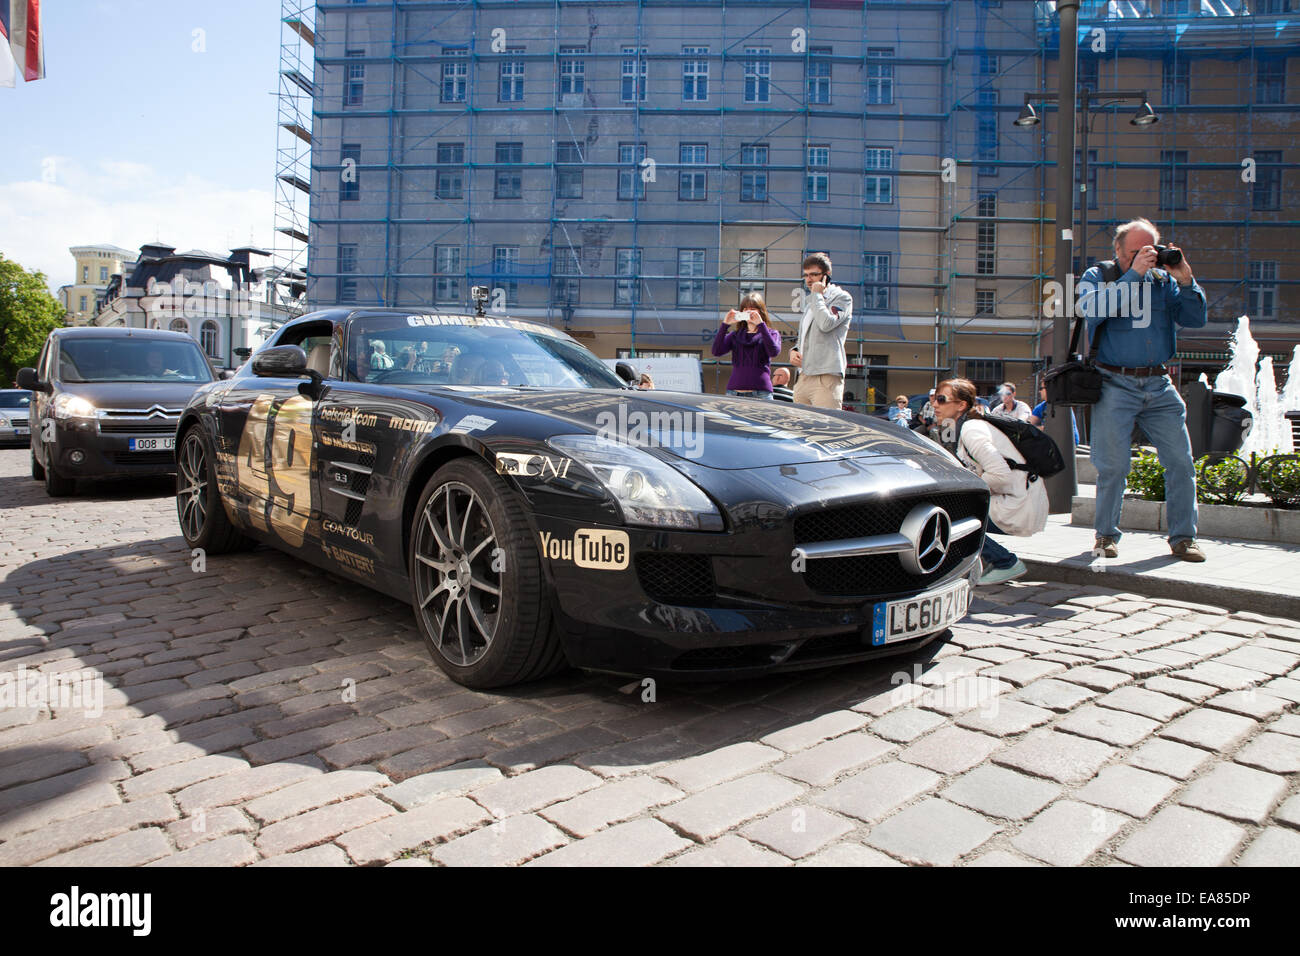 Tallinn, Estonia - May 21, 2013: Gumball 3000 (15th anniversary event) Mercedes sports car at the streets of old town of Tallinn Stock Photo